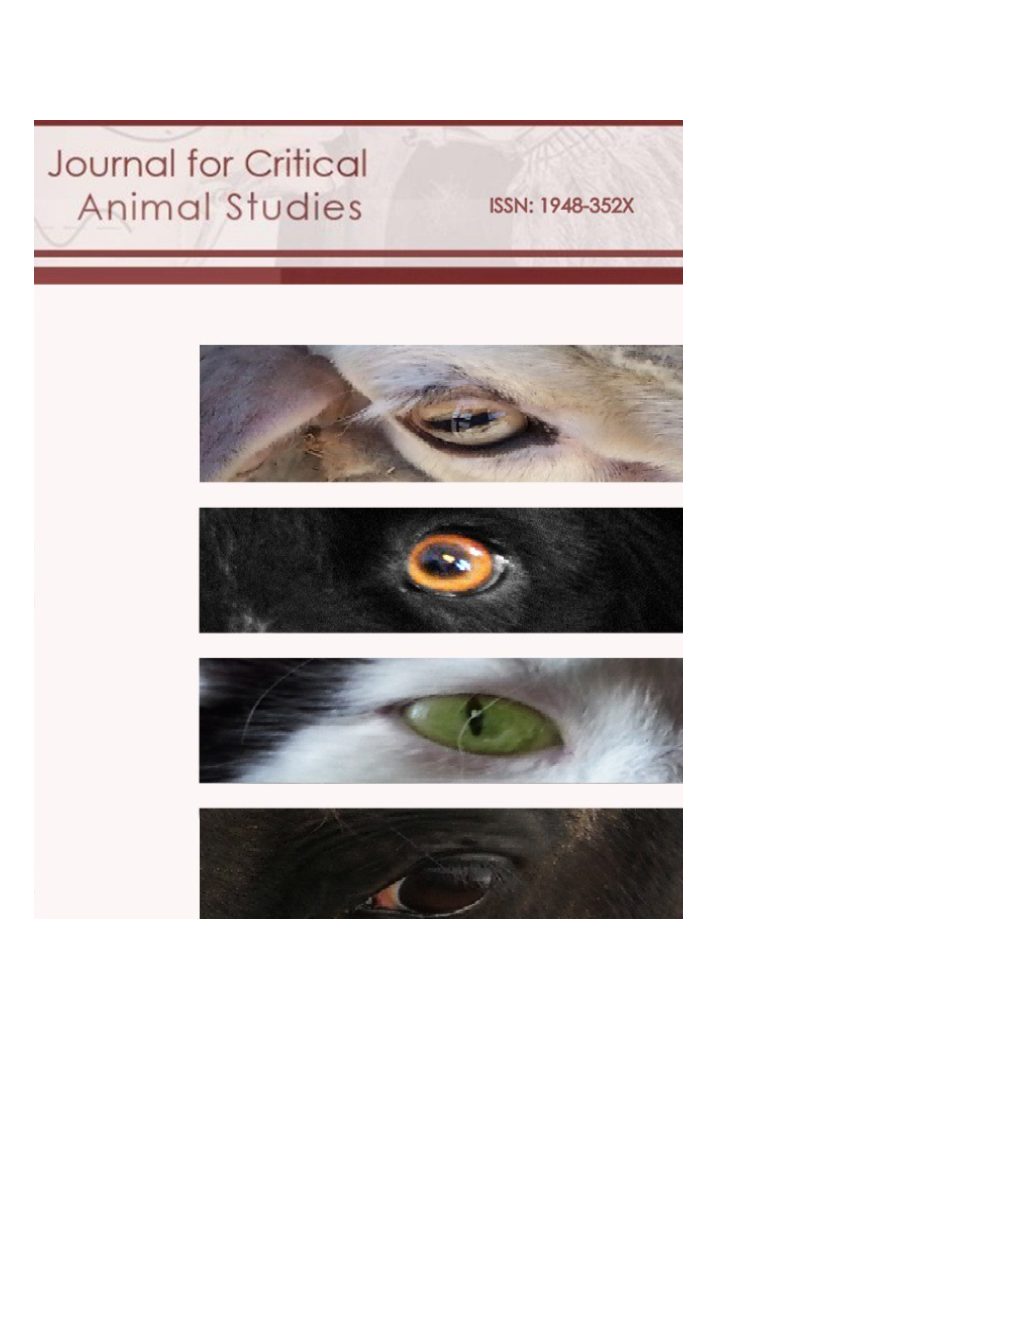 Journal for Critical Animal Studies Editorial Executive Board